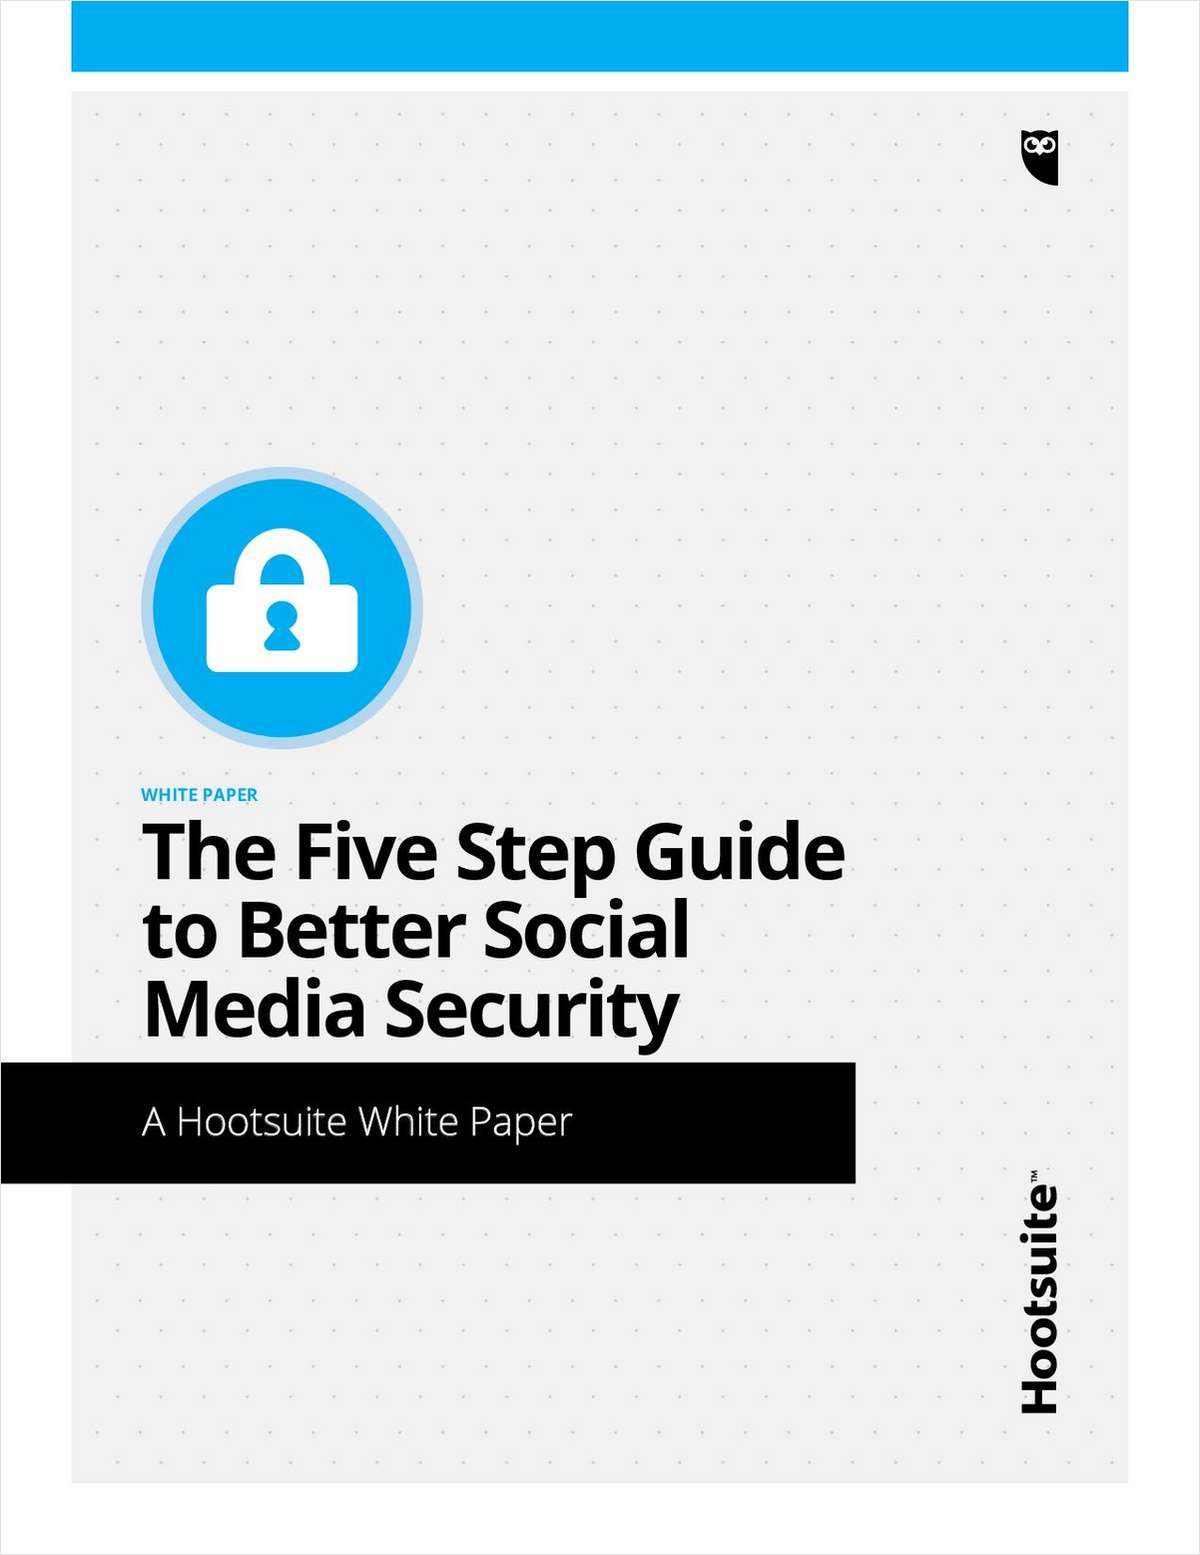 The Five-Step Guide for Better Social Media Security